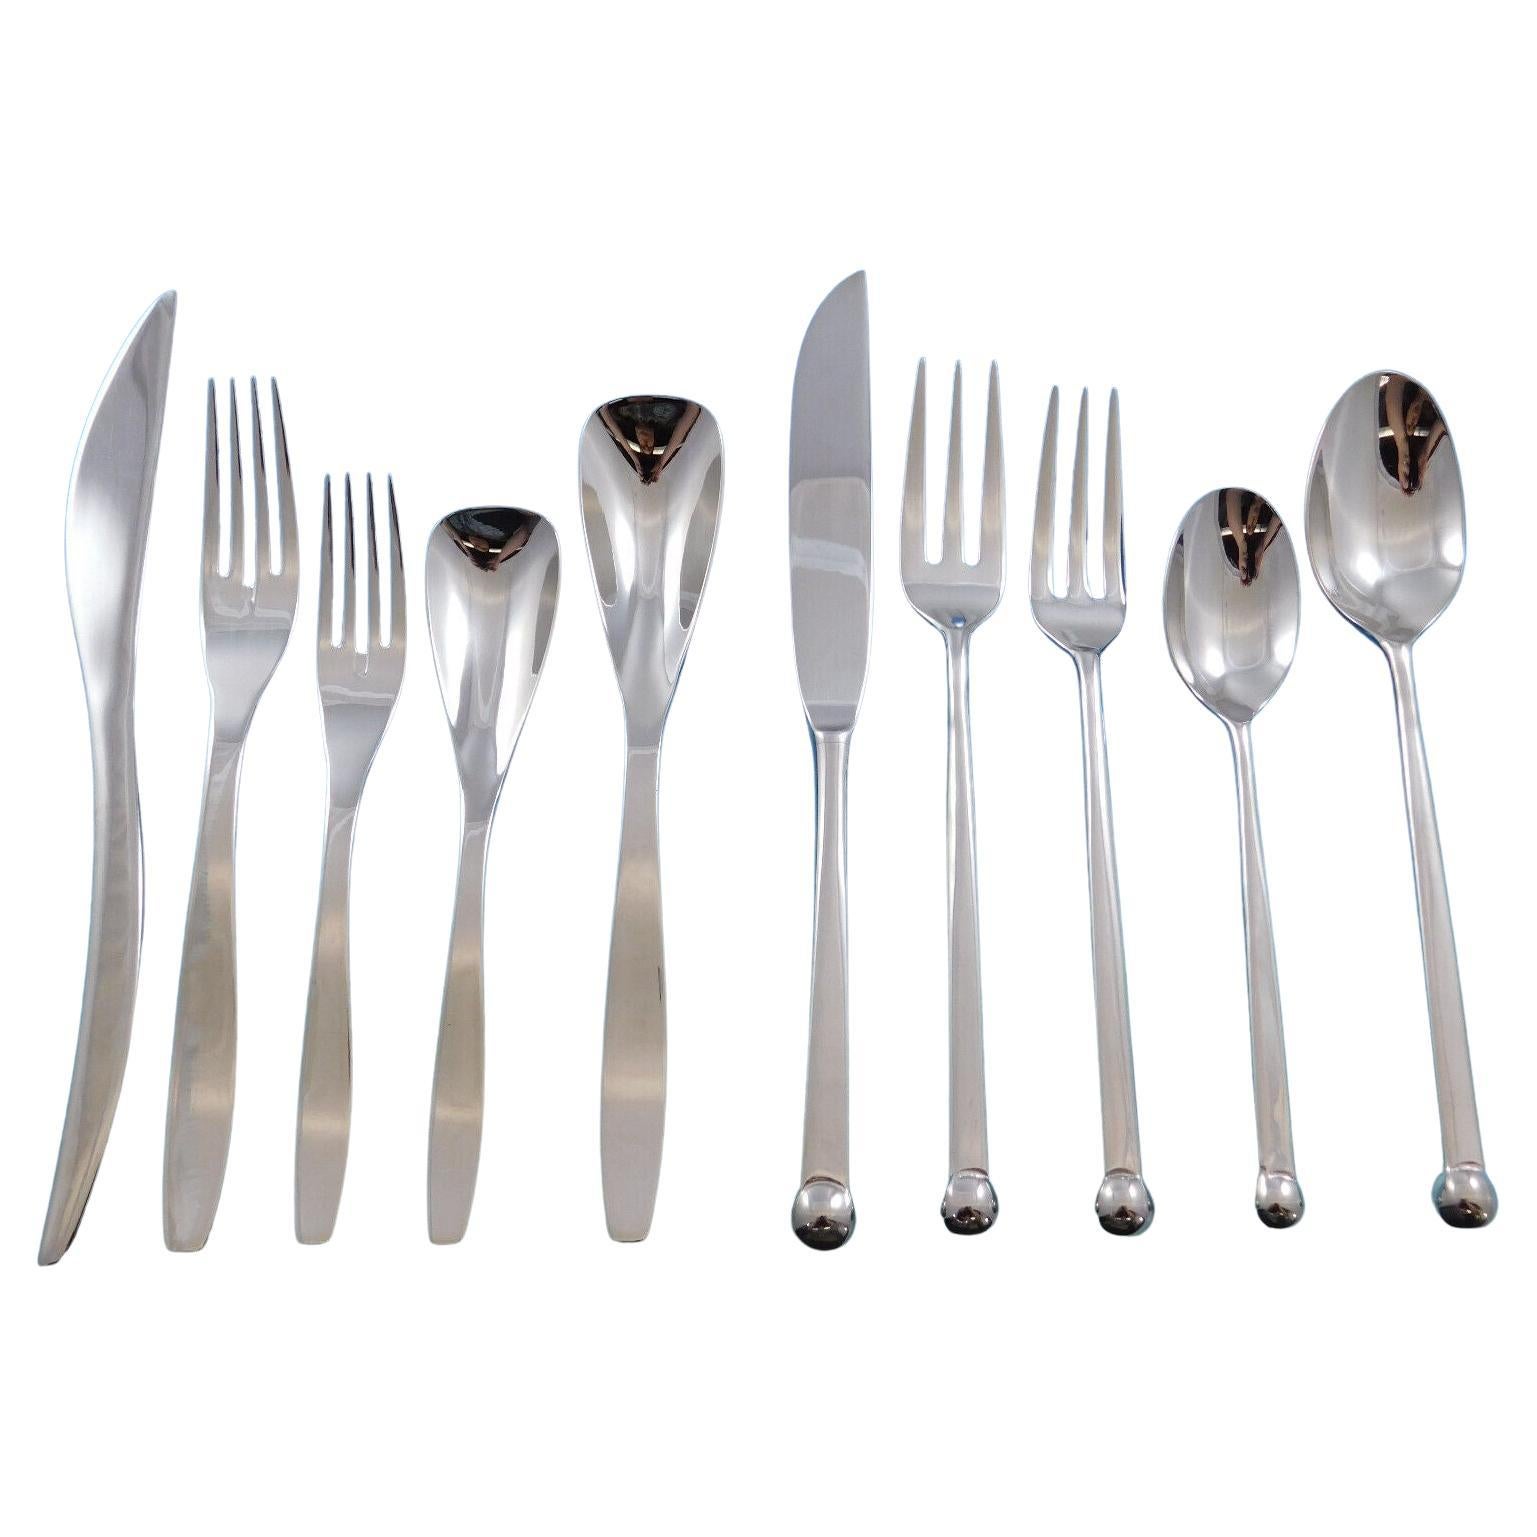 Designer Mixed Stainless Steel Flatware Set #4 Service 62 Pieces Modern Unused For Sale